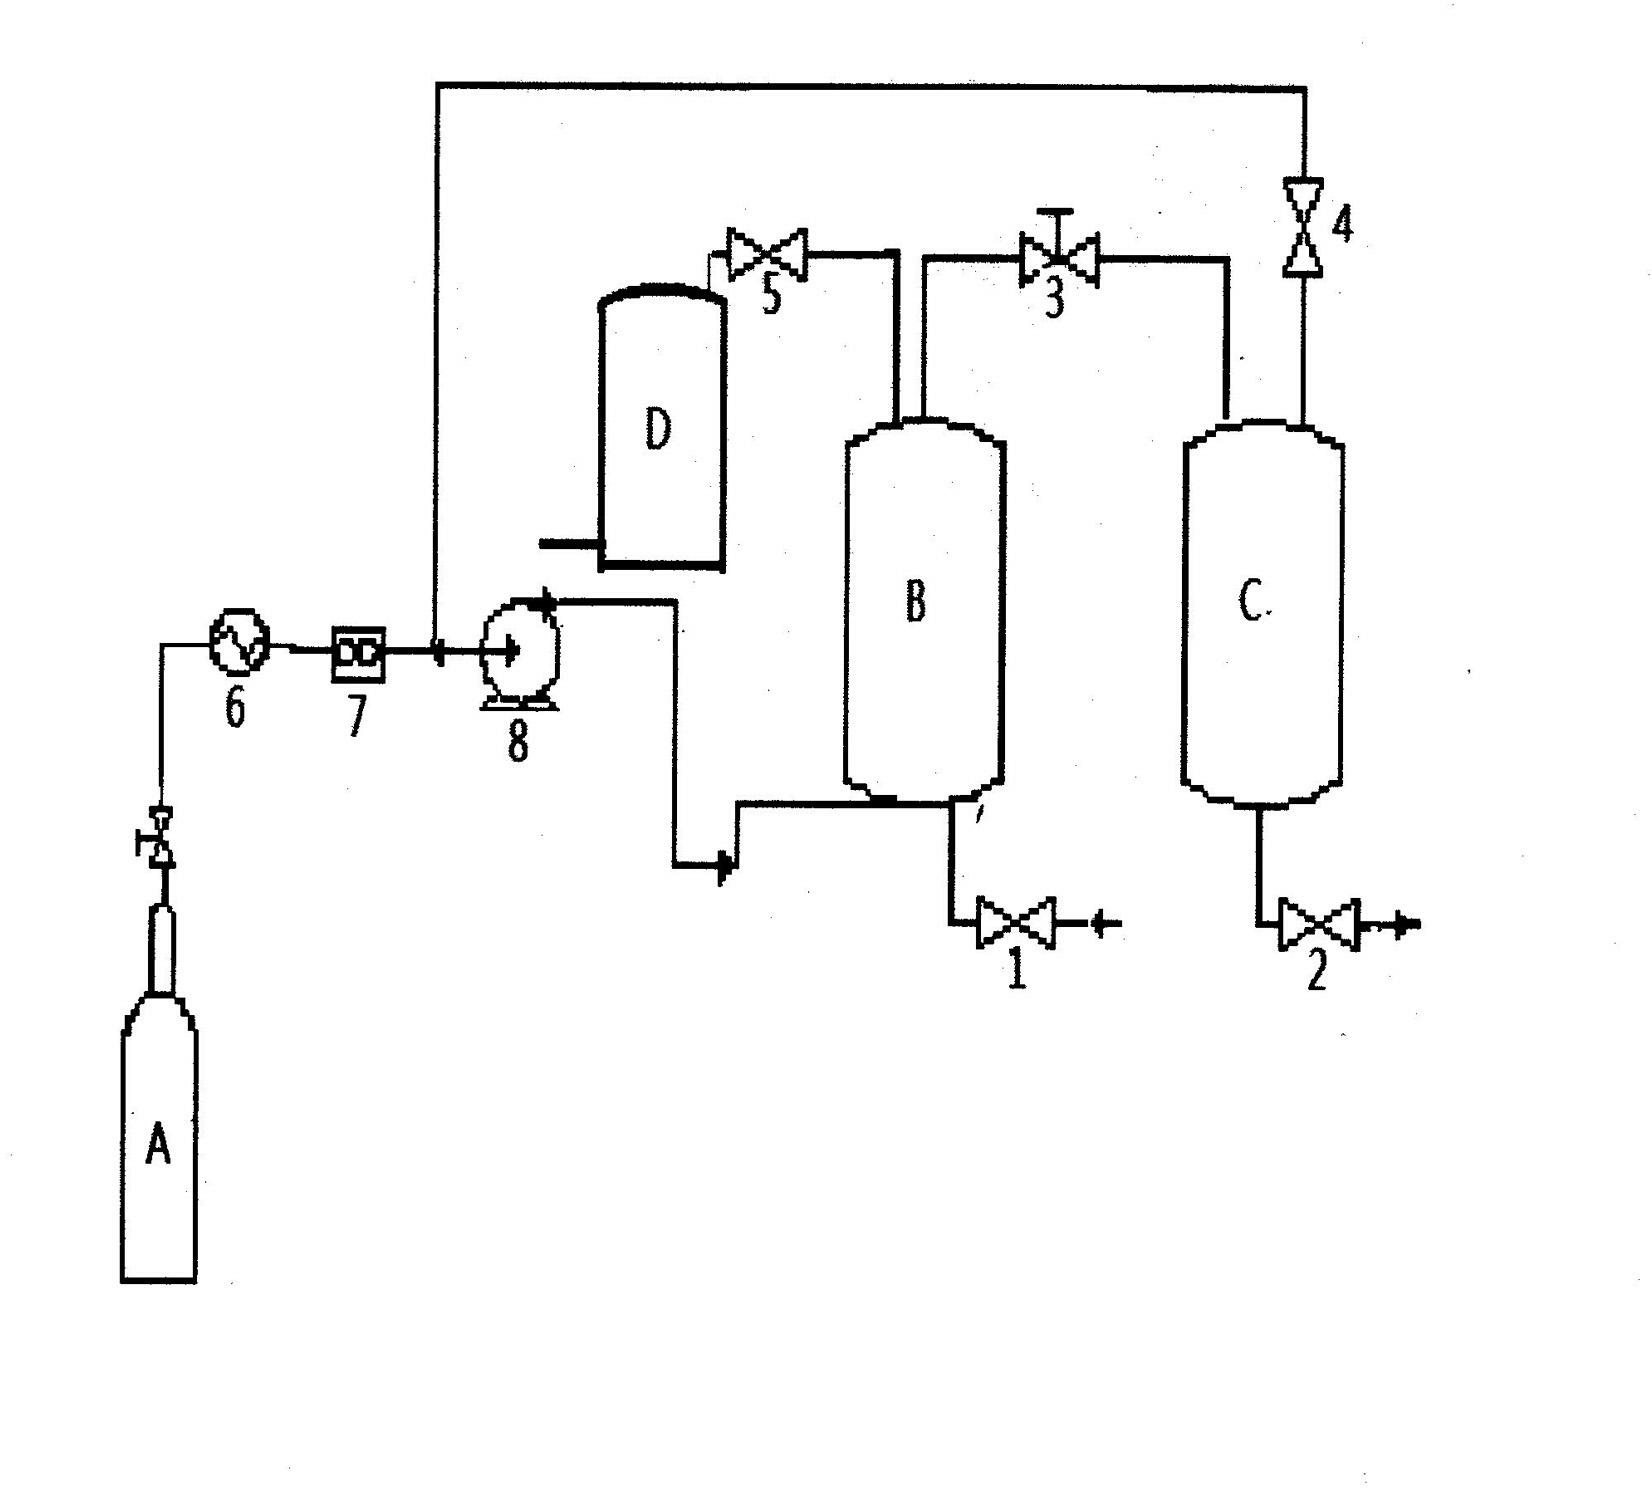 Method for removing hexaldehyde and 2-heptanone in cyclohexanone